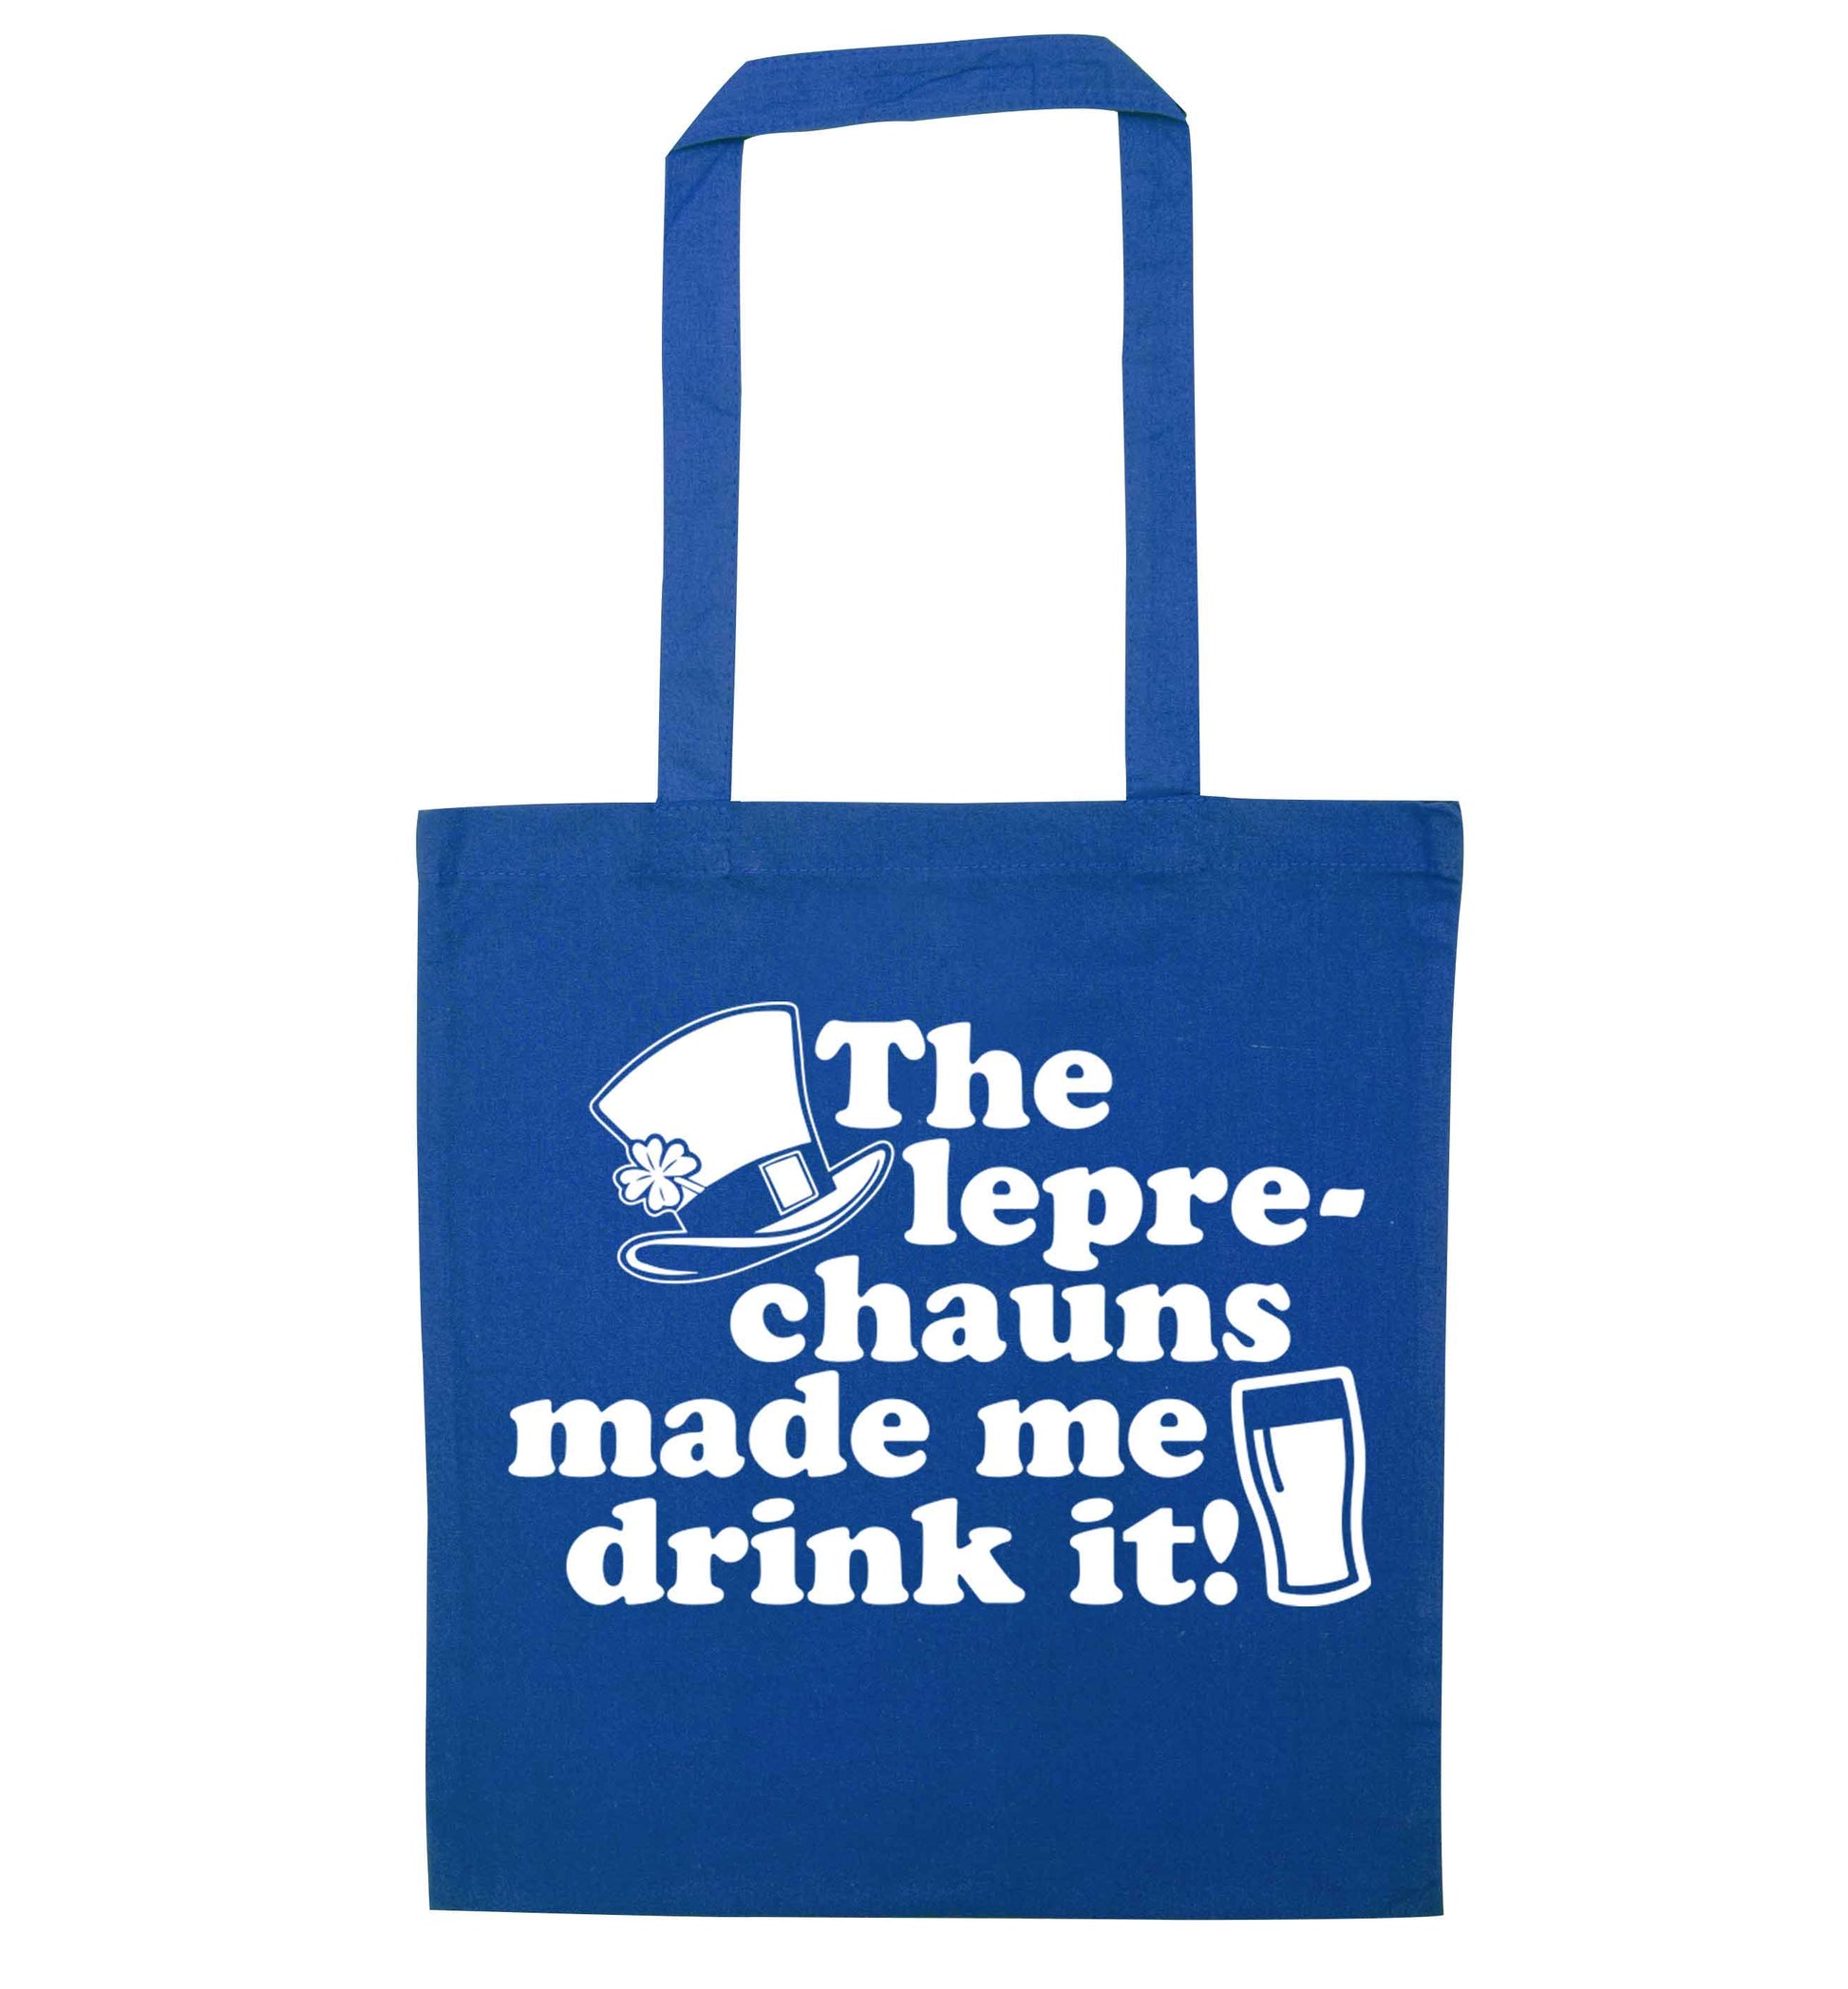 The leprechauns made me drink it blue tote bag